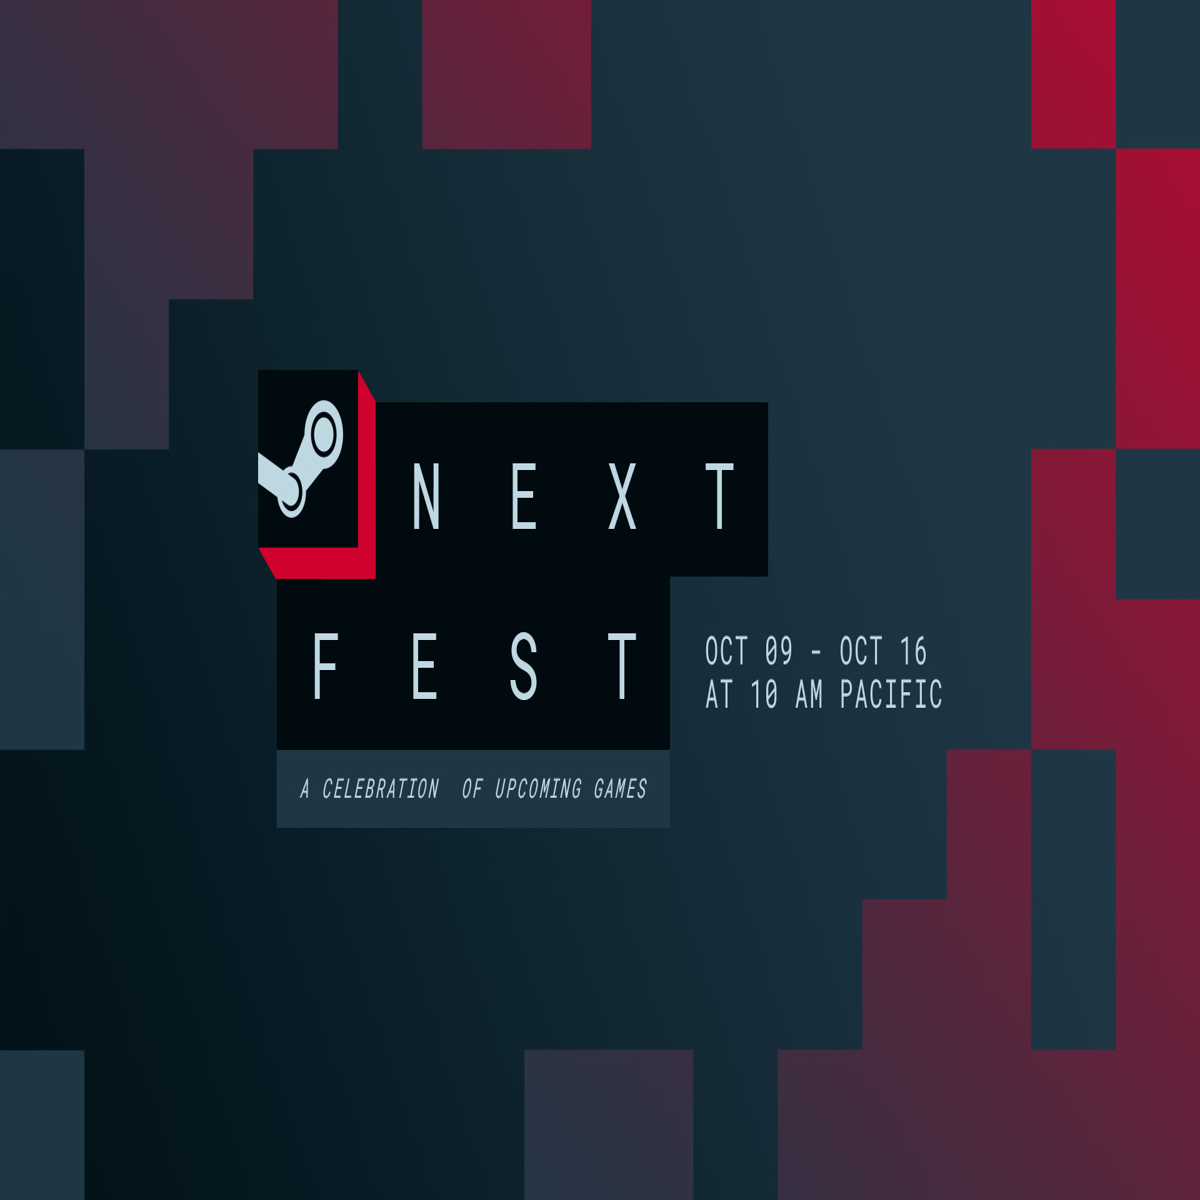 12 Steam Next Fest demos to try first this October